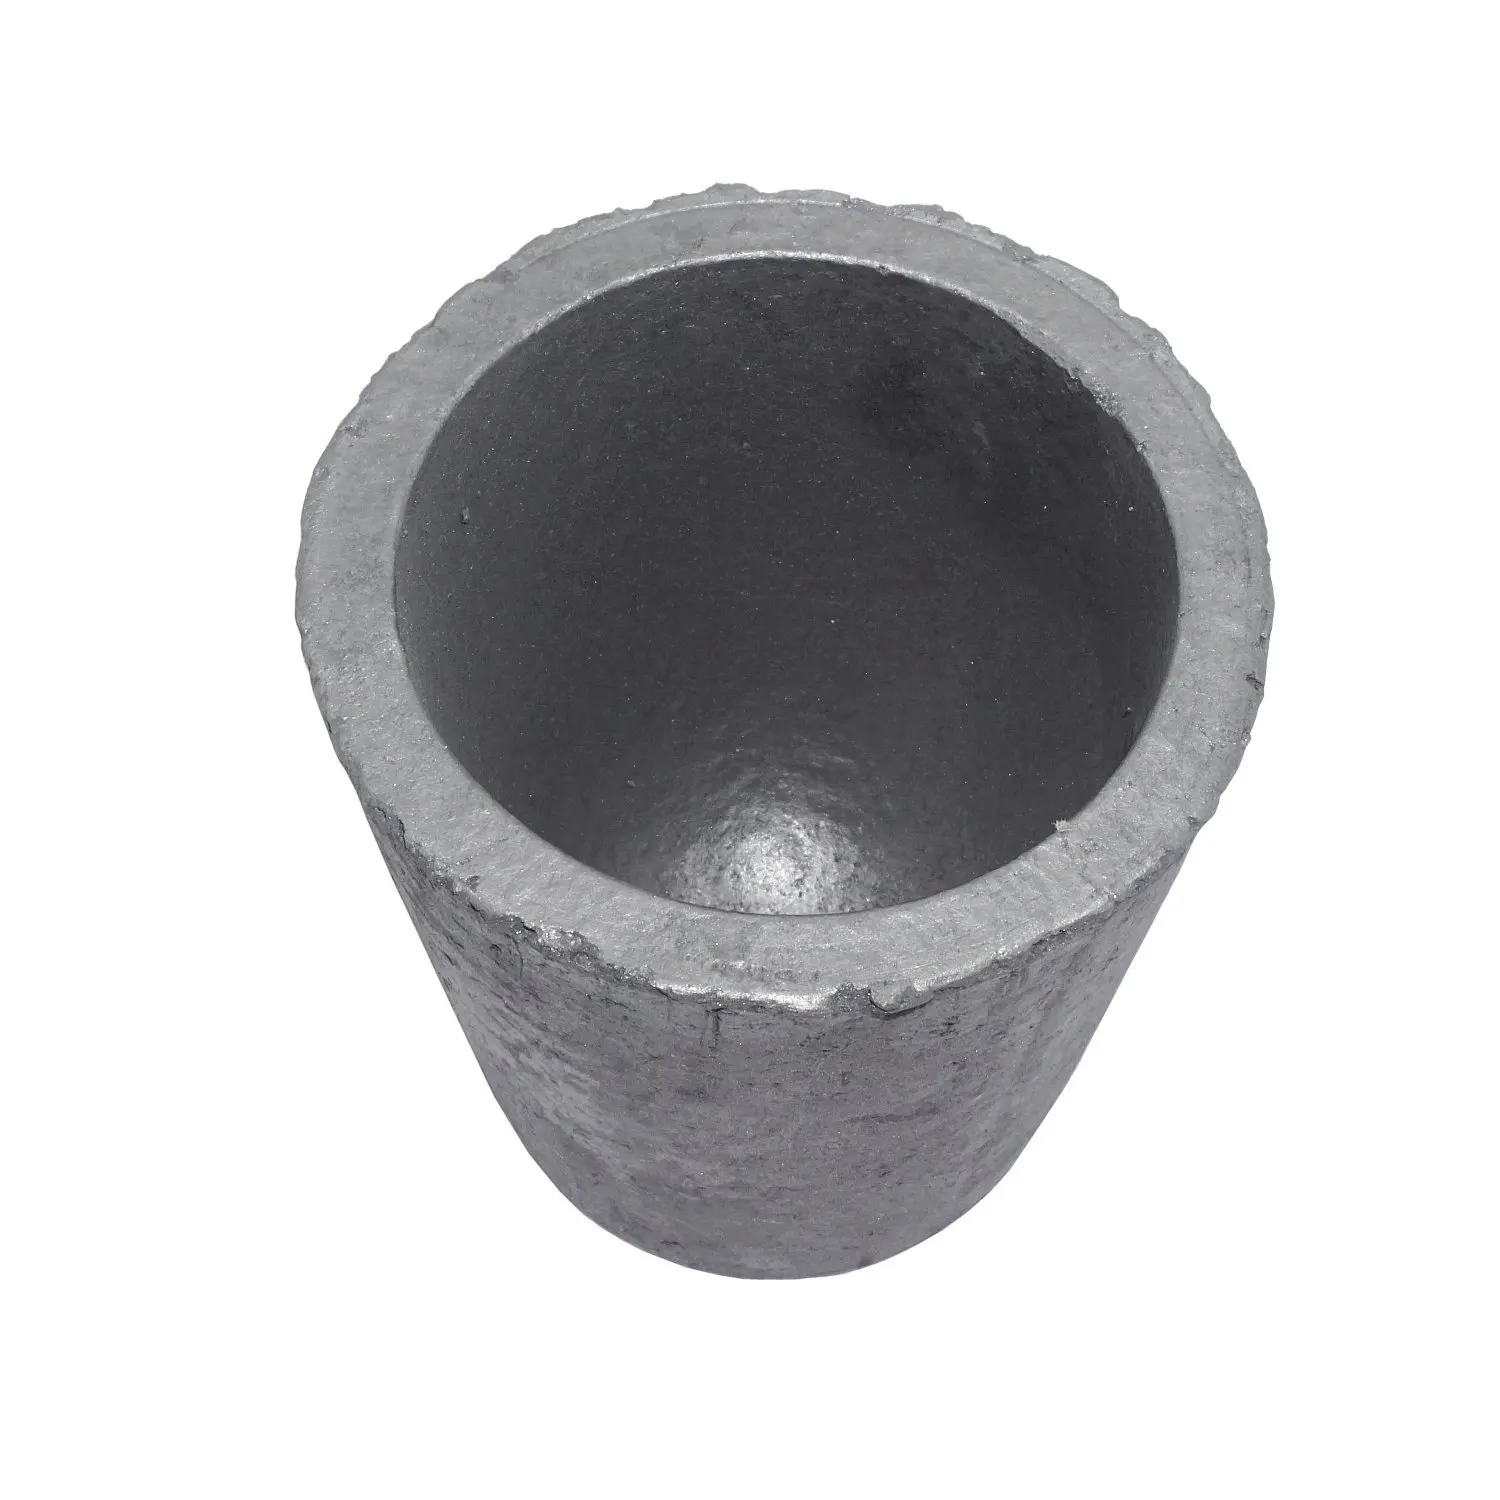 0.5# Foundry Silicon Carbide Graphite Crucibles Cup Furnace Torch Melting Casting Refining Gold Silver Copper Brass Aluminum